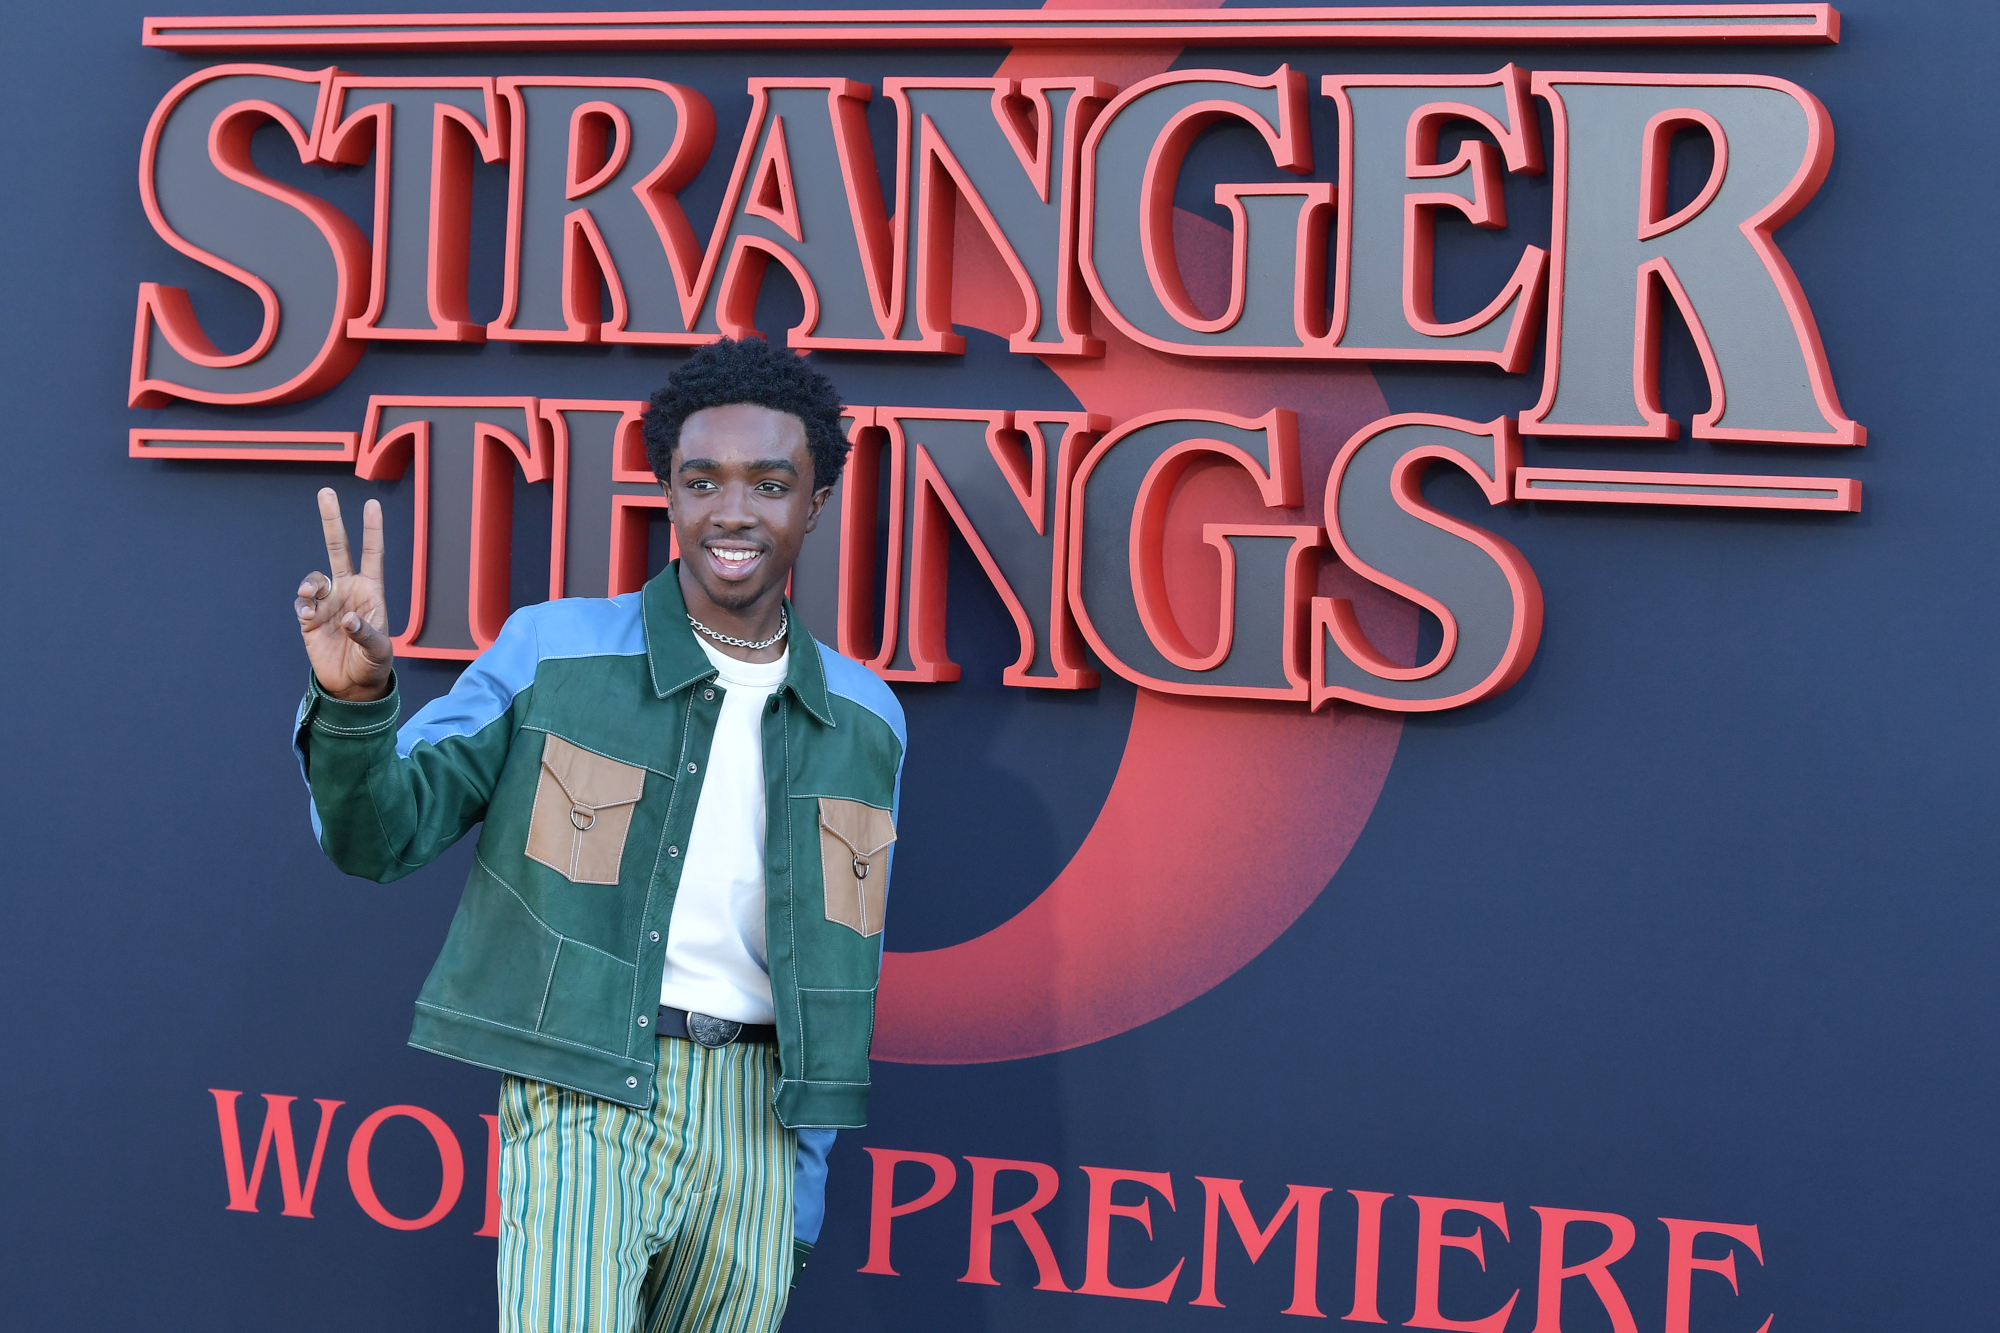 Stranger Things Season 4 star Caleb McLaughlin holds up a peace sign in front of a wall with the show's title on it. He's wearing a green jacket with brown pockets on the front and blue shoulders.